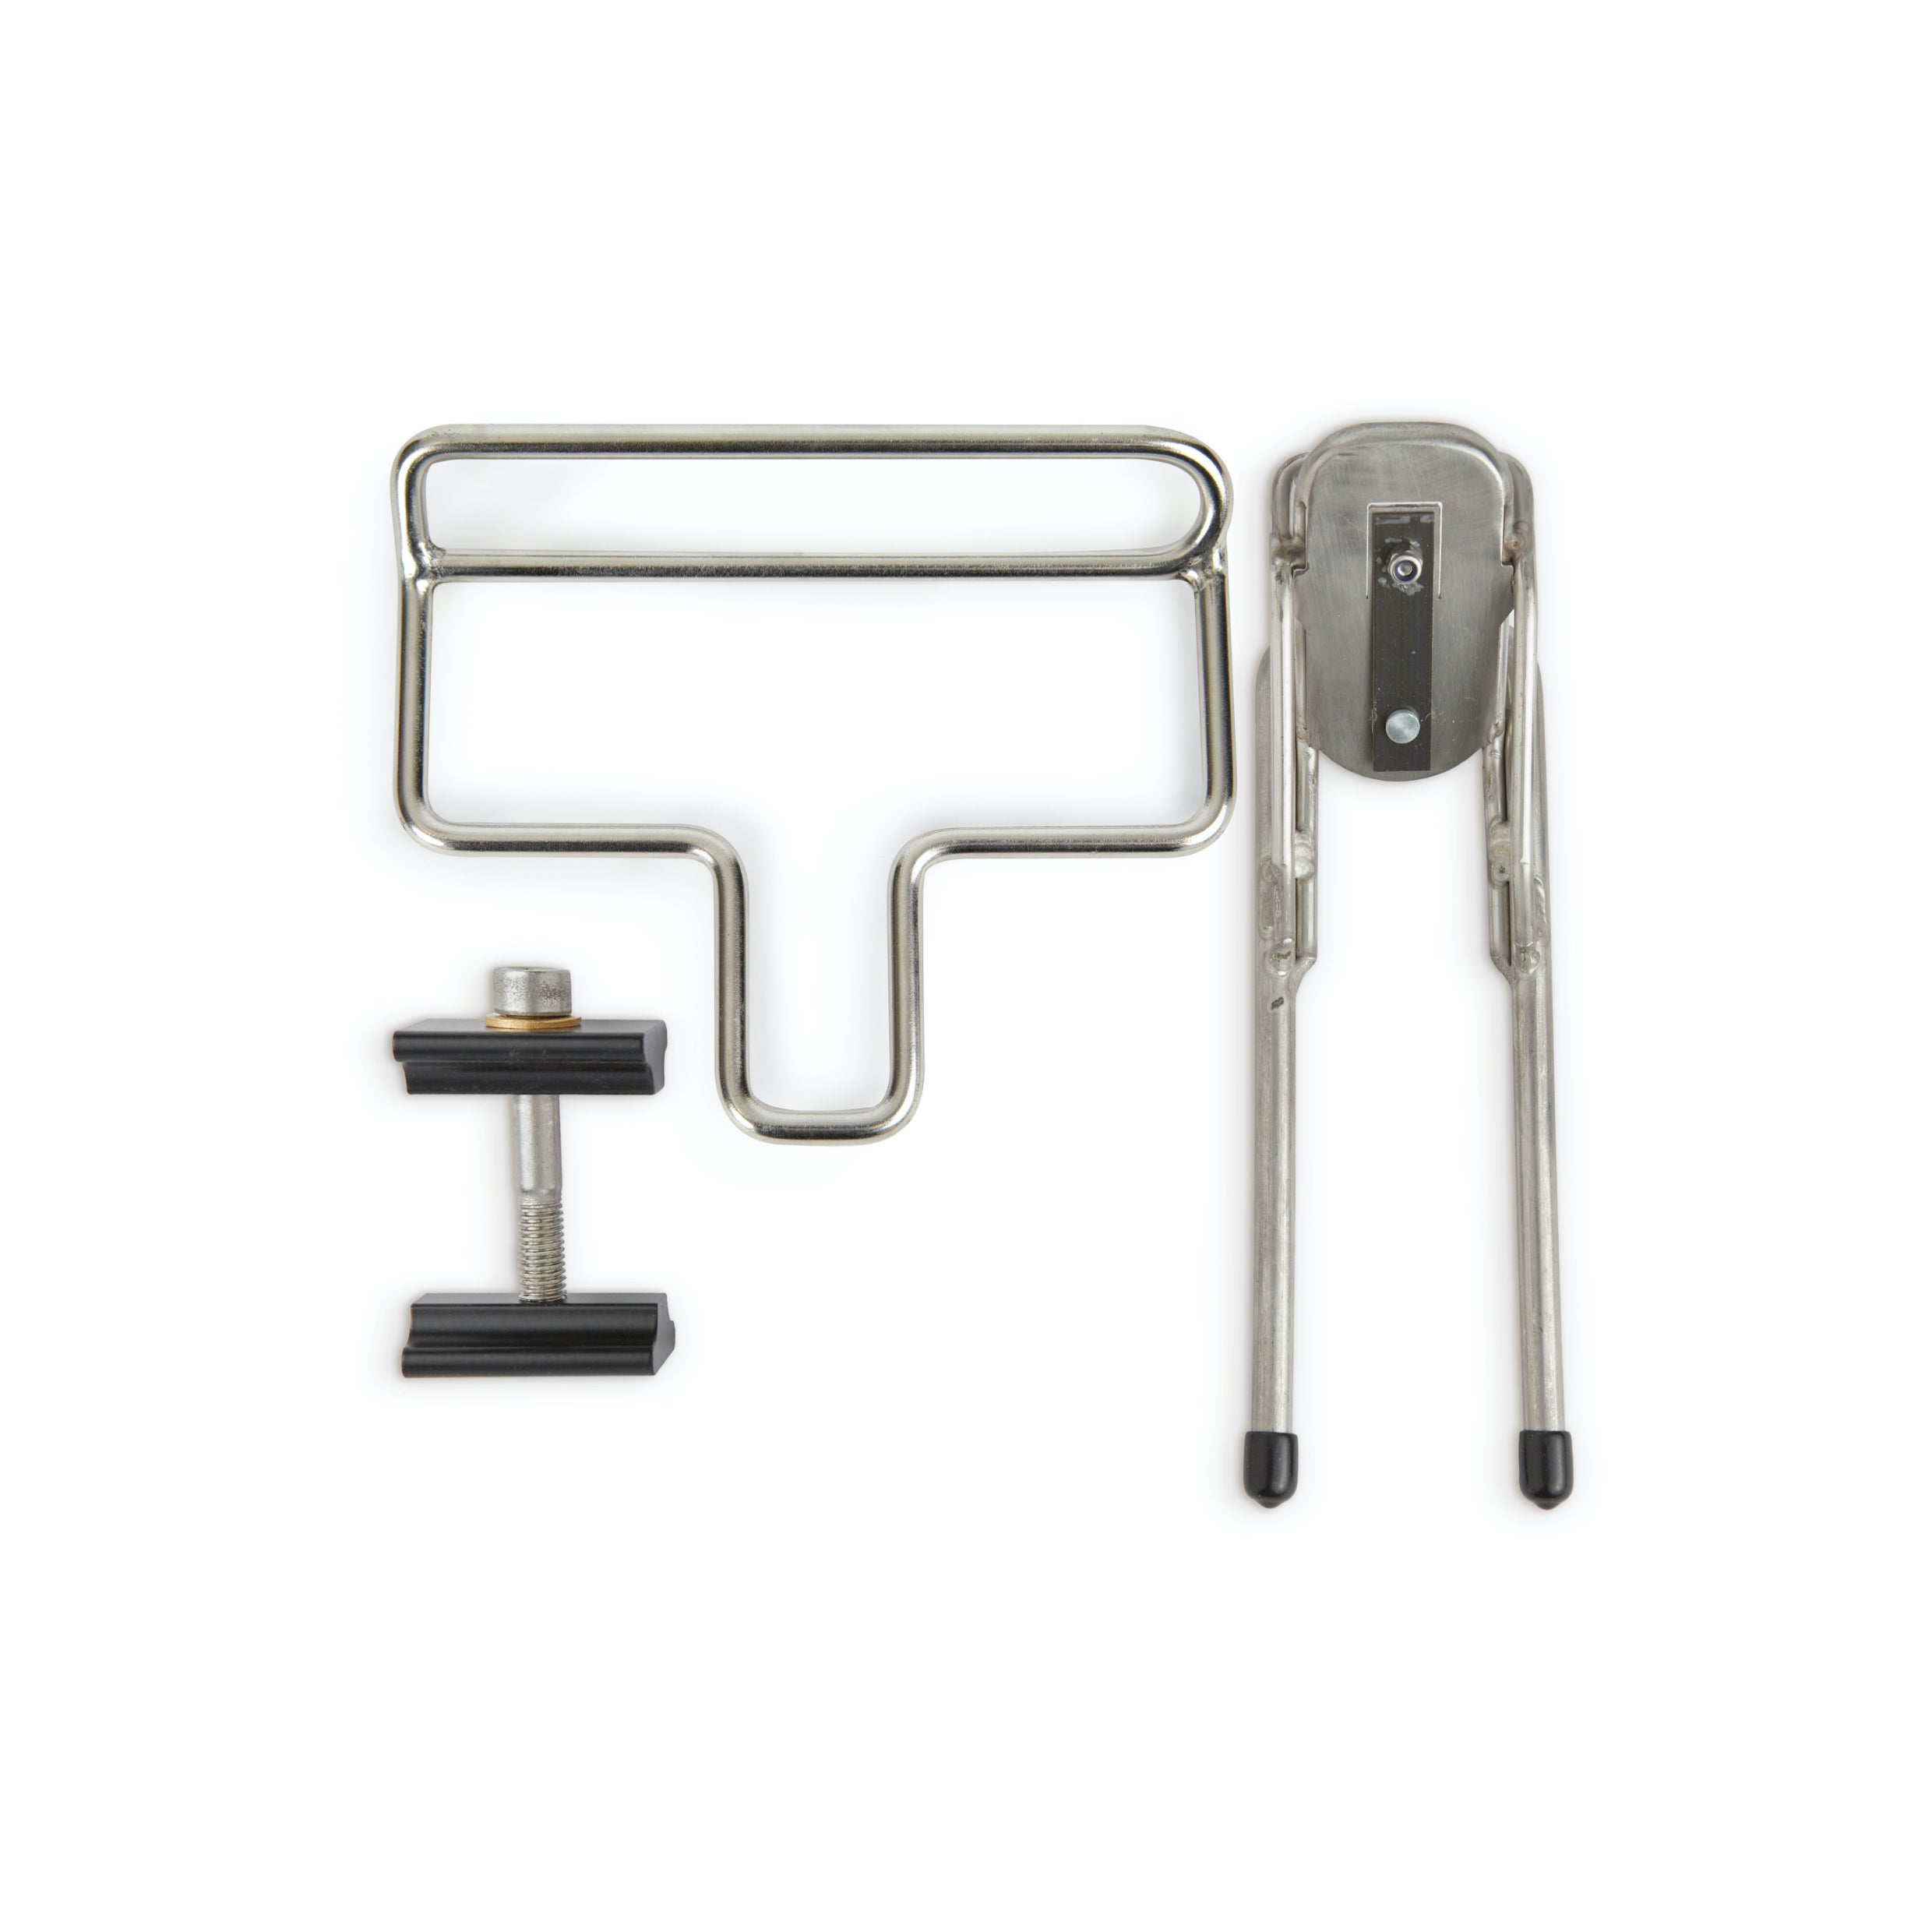 Components included in Frost and Sekers quick-release micro-rack for Brompton bikes.